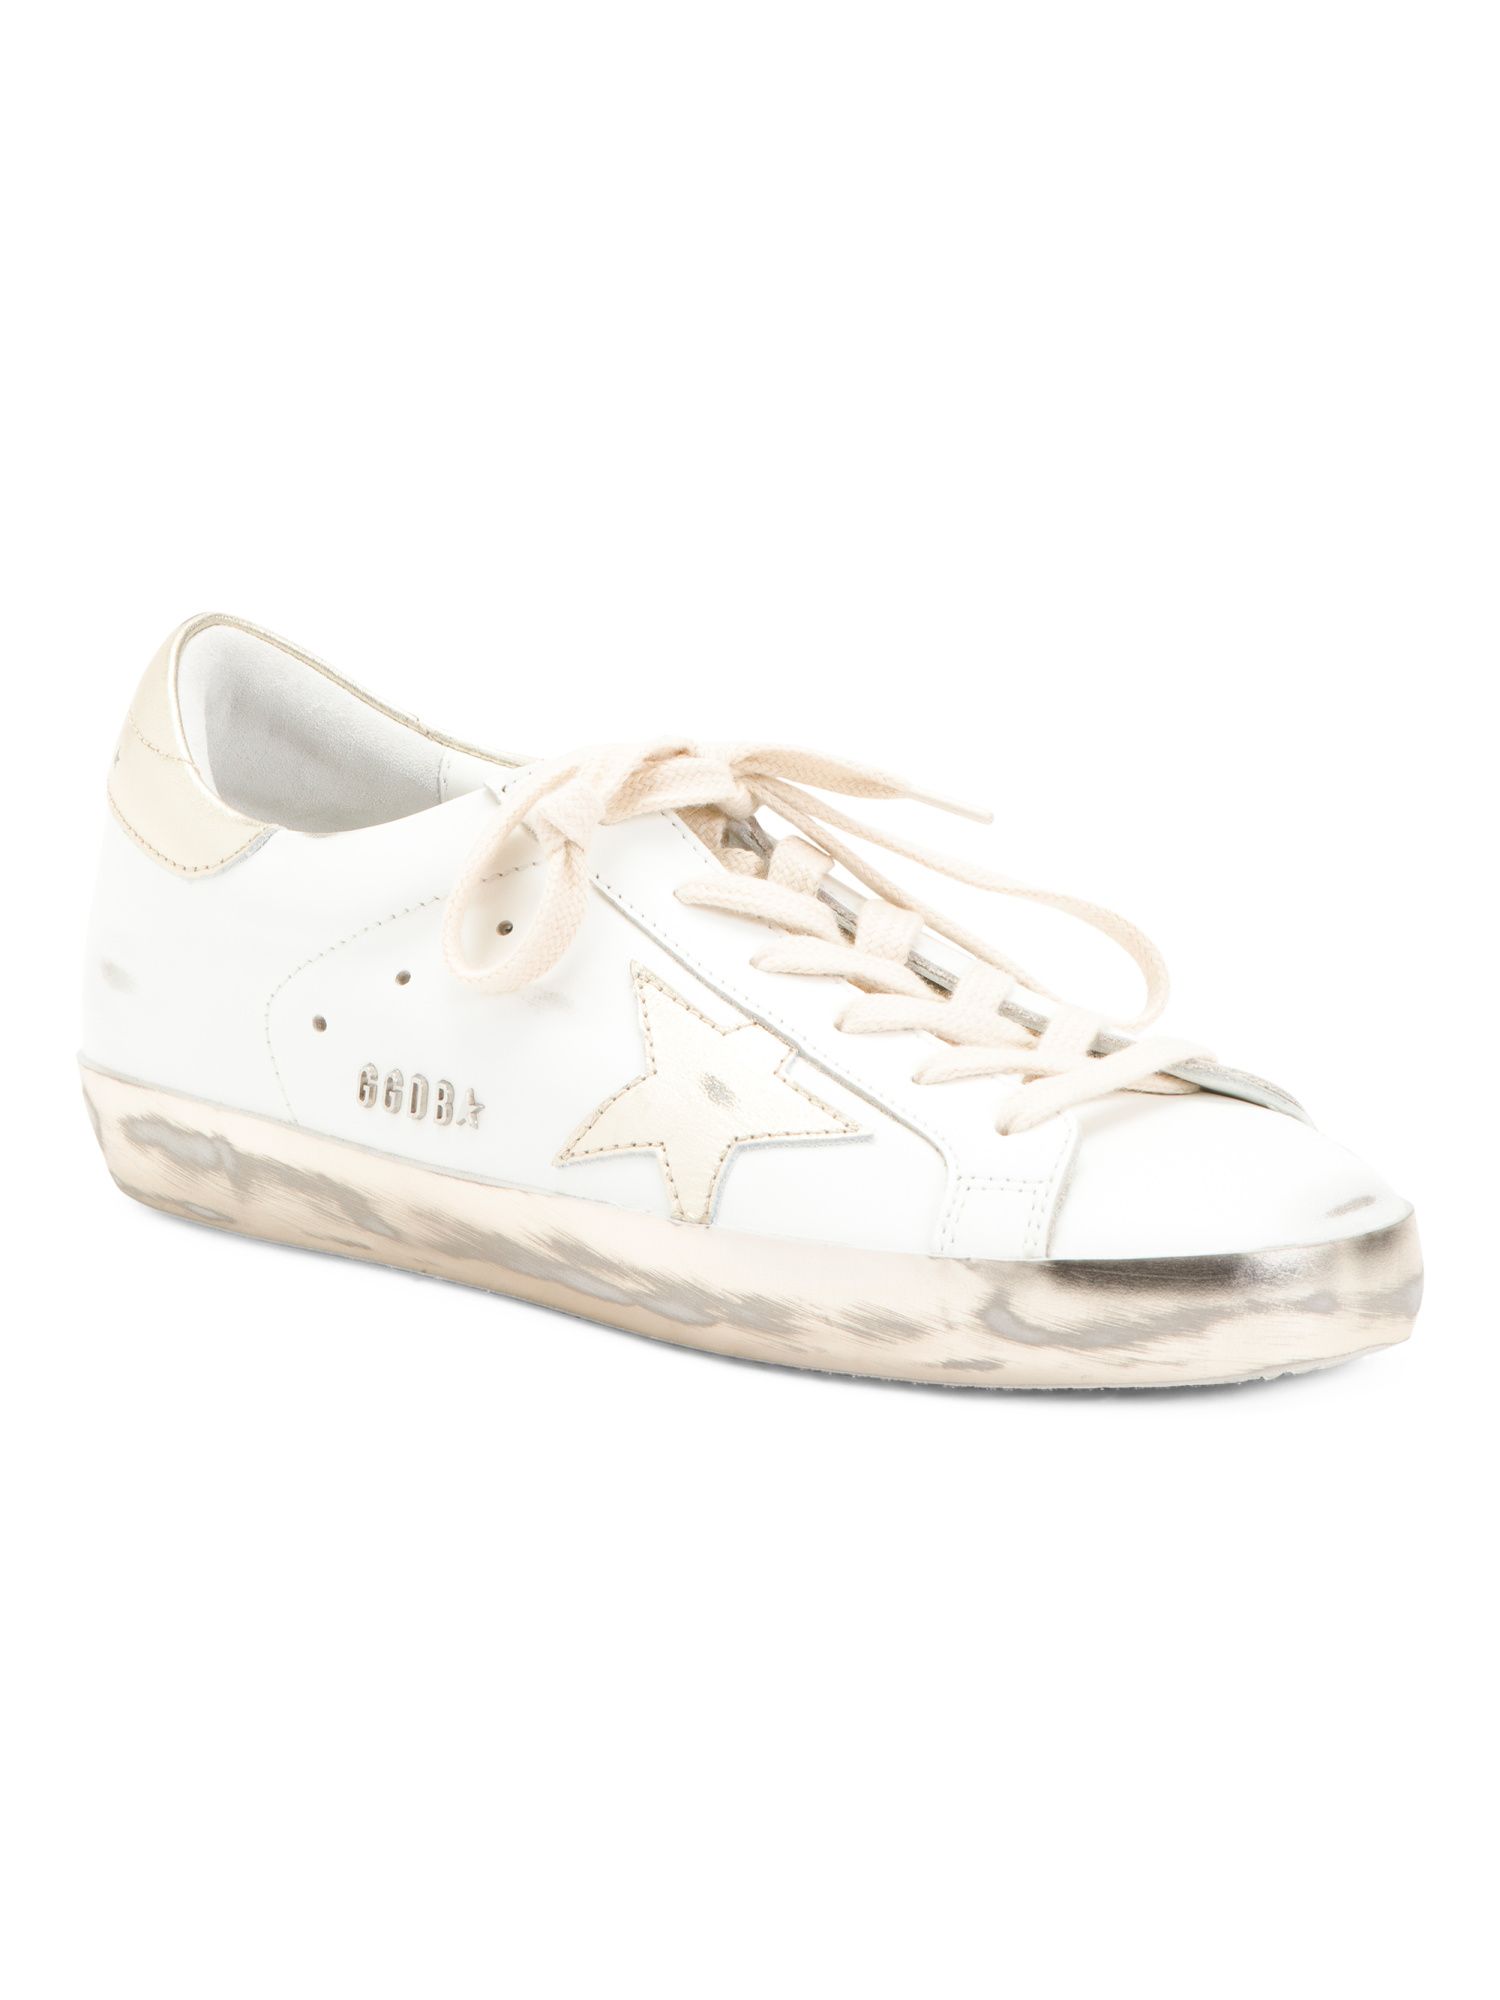 Made In Italy Leather Metallic Distressed Sneakers | TJ Maxx